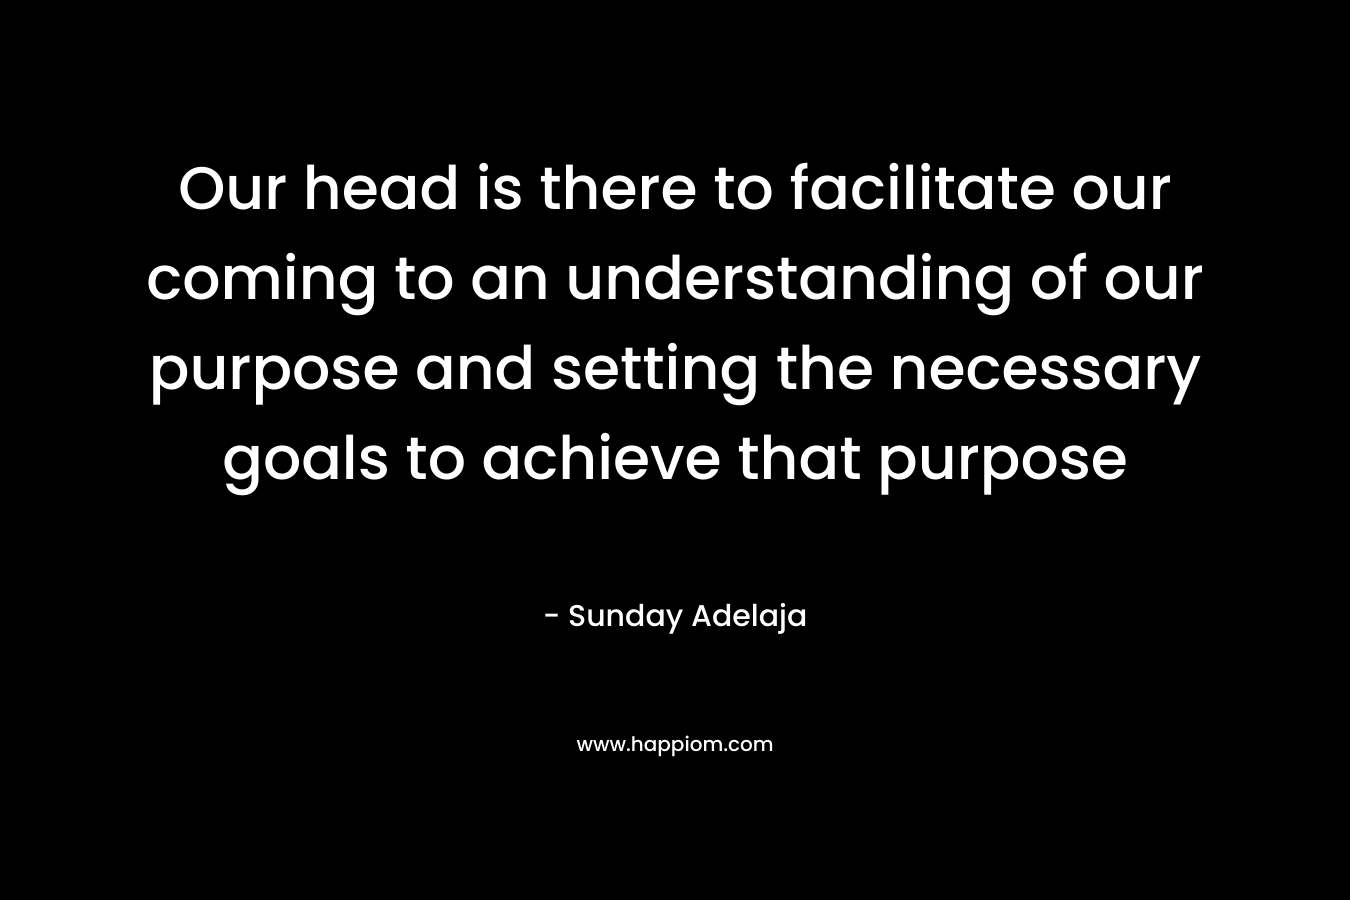 Our head is there to facilitate our coming to an understanding of our purpose and setting the necessary goals to achieve that purpose